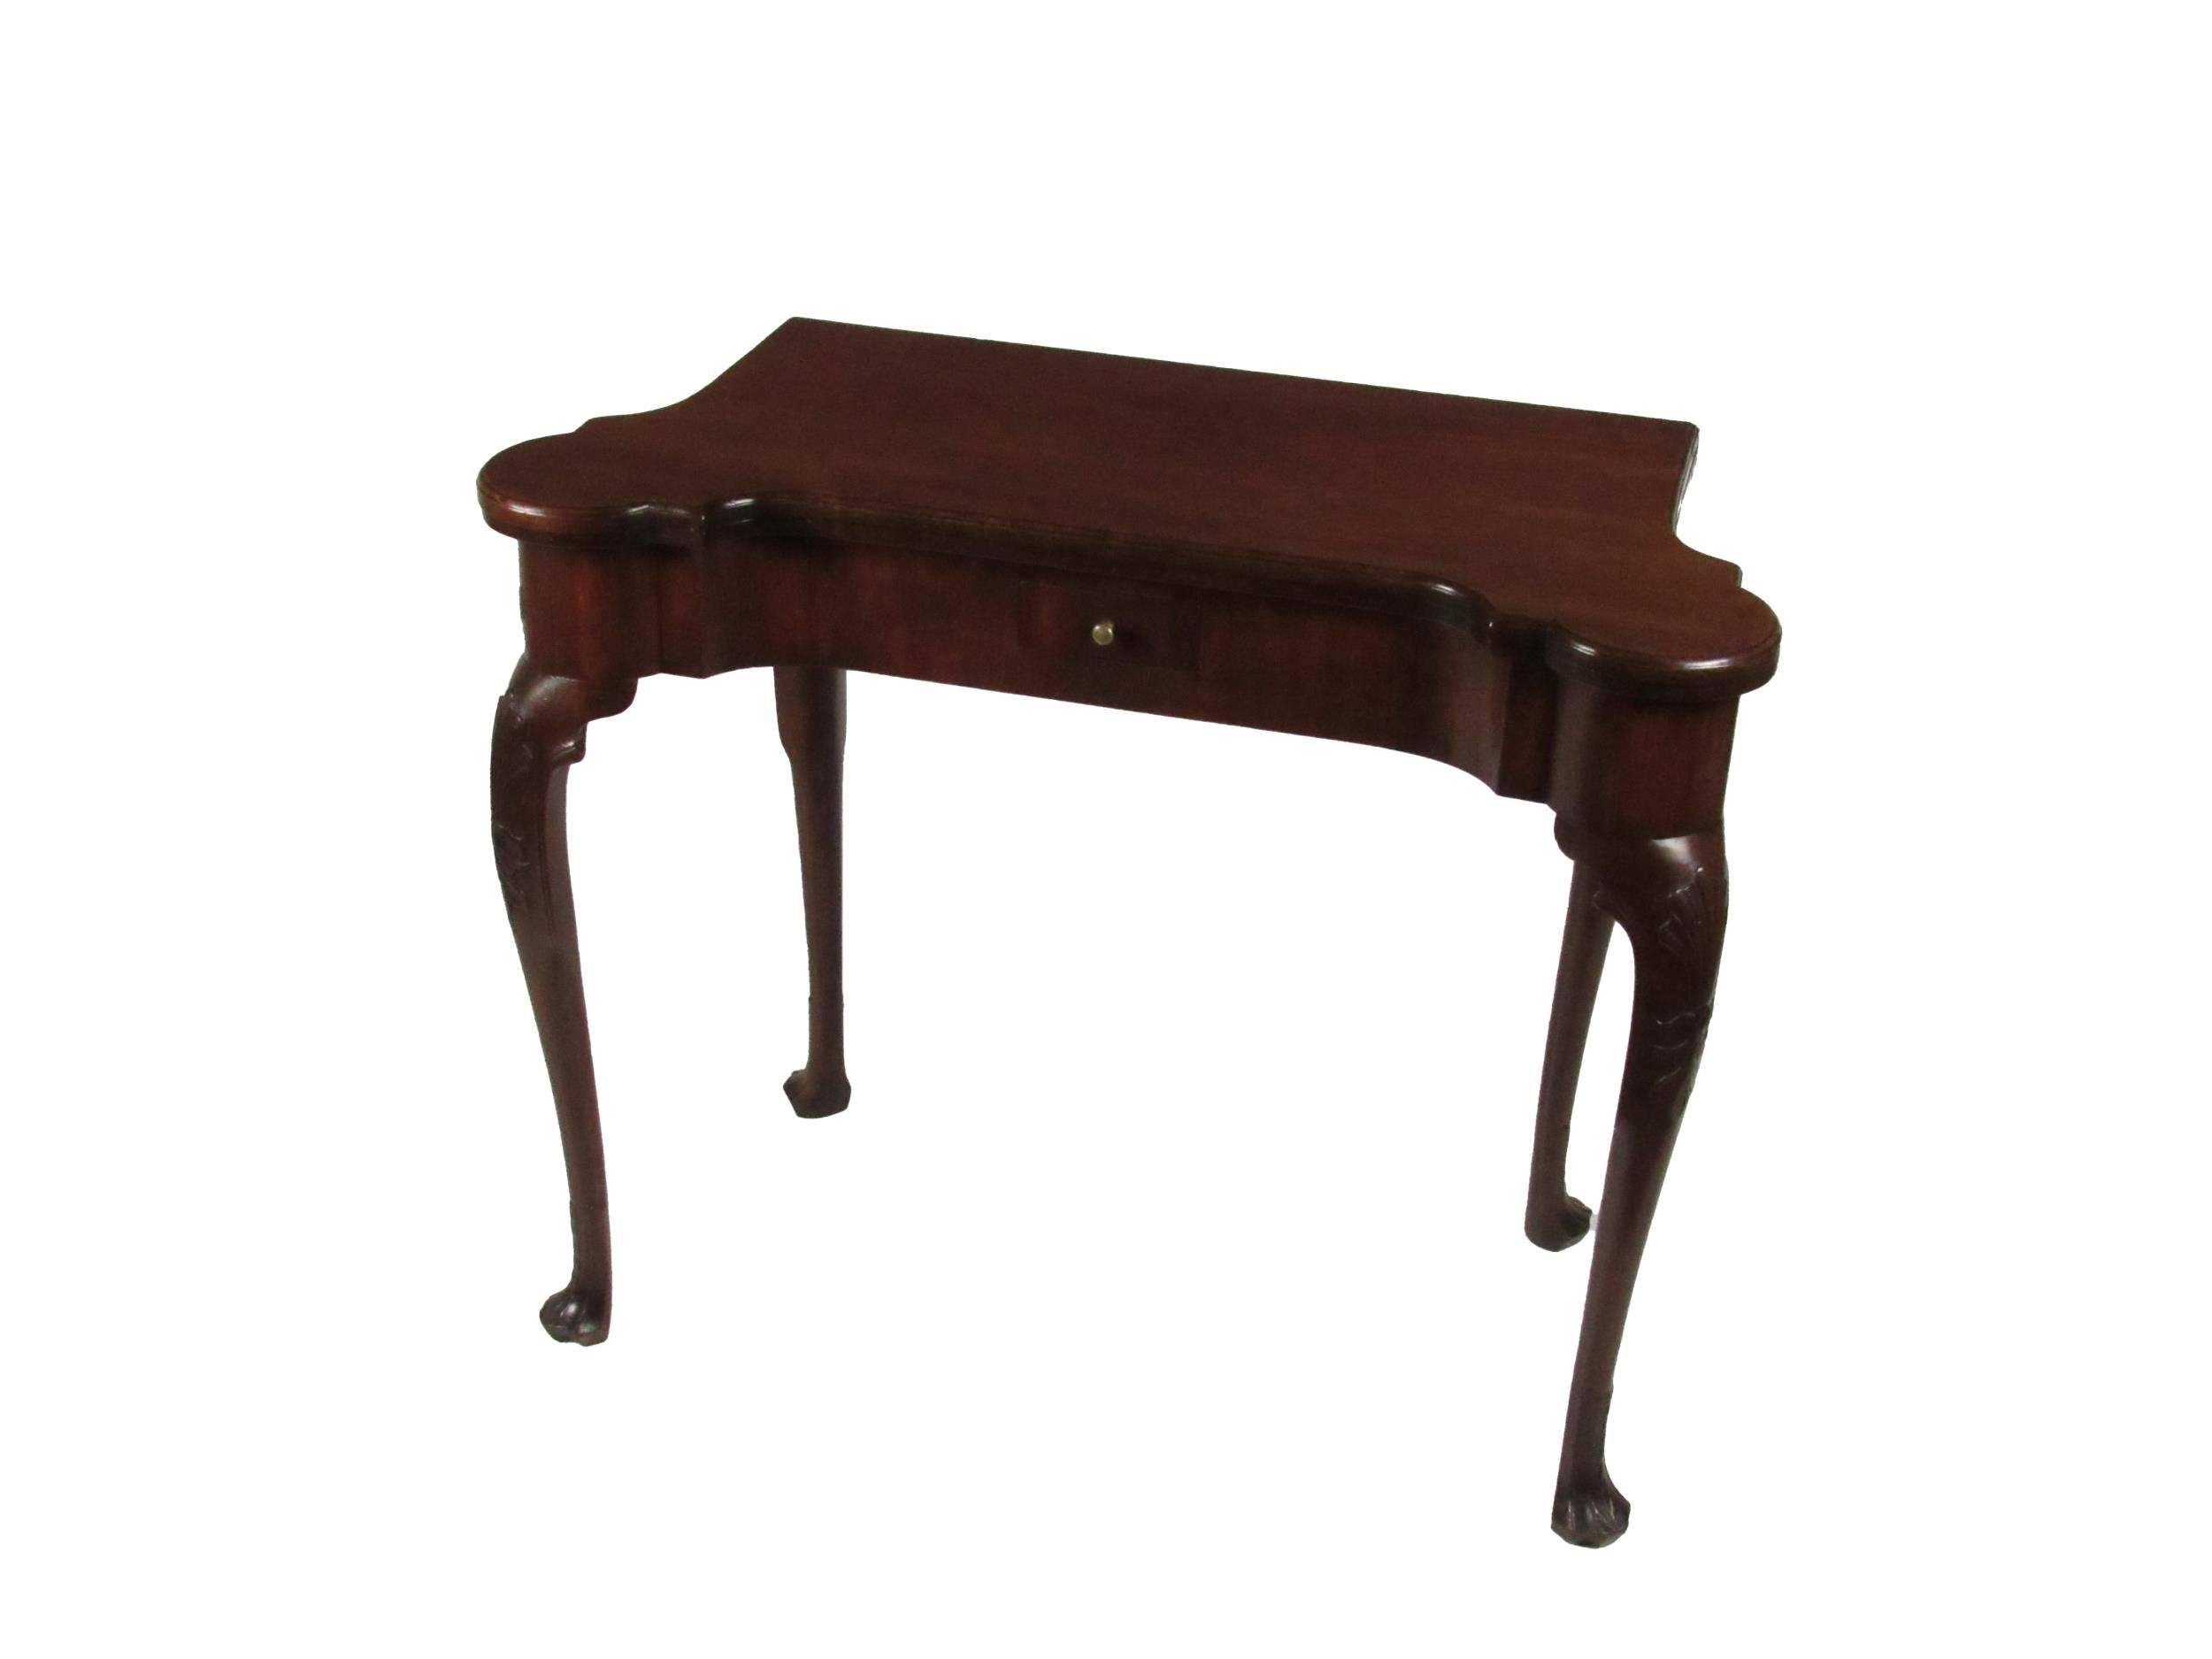 A fine quality Irish Georgian period mahogany fold-over Card Table, the shaped top opening to reveal